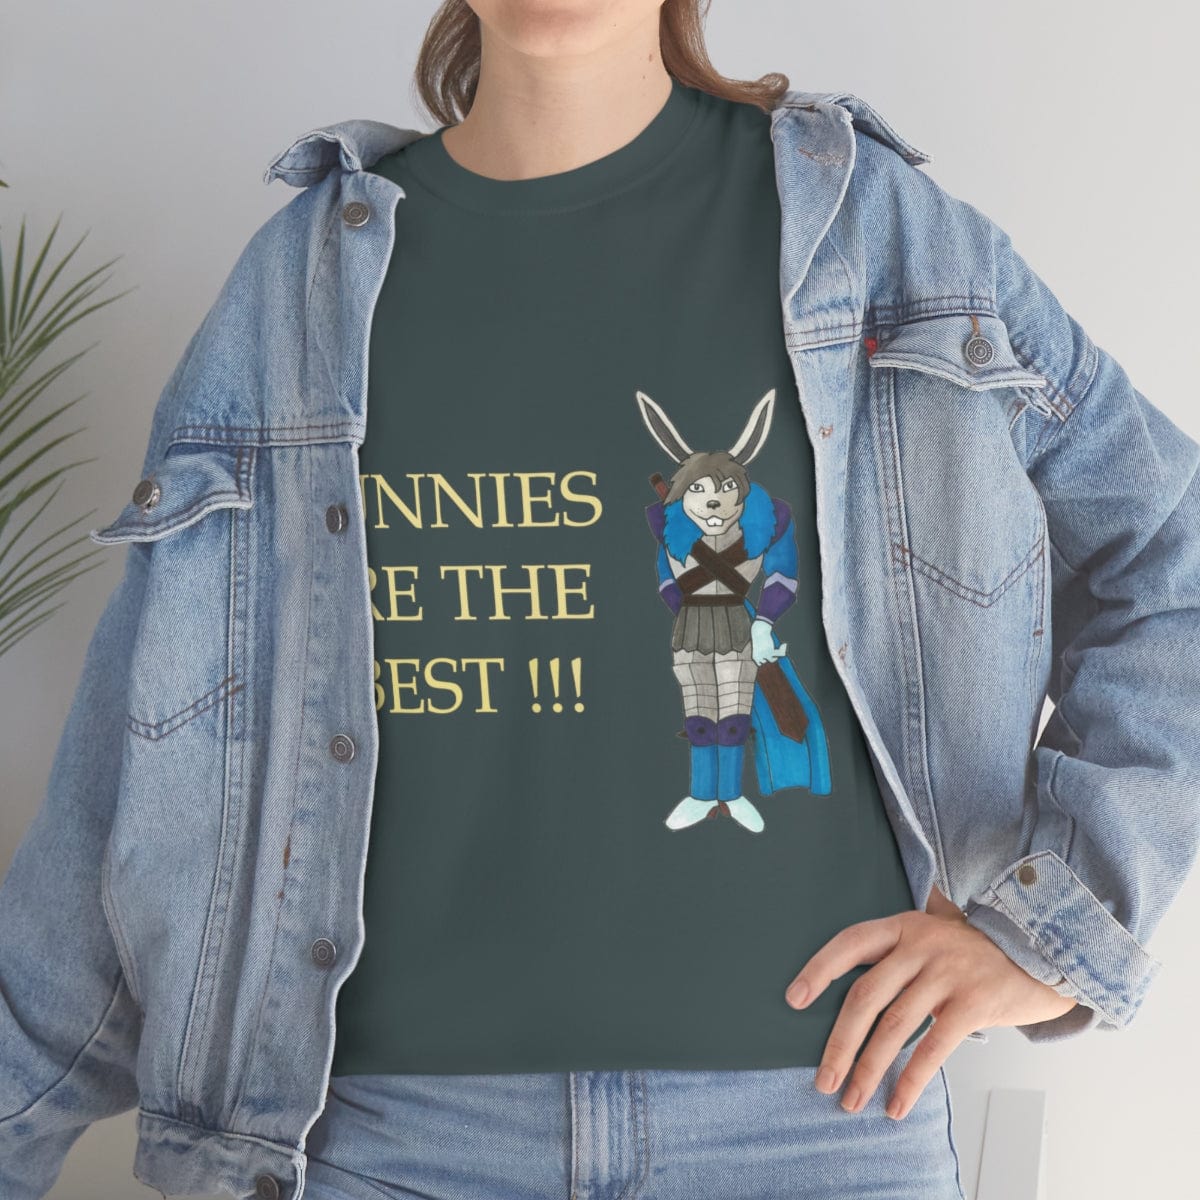 Bunnies are the best!!! T-shirt